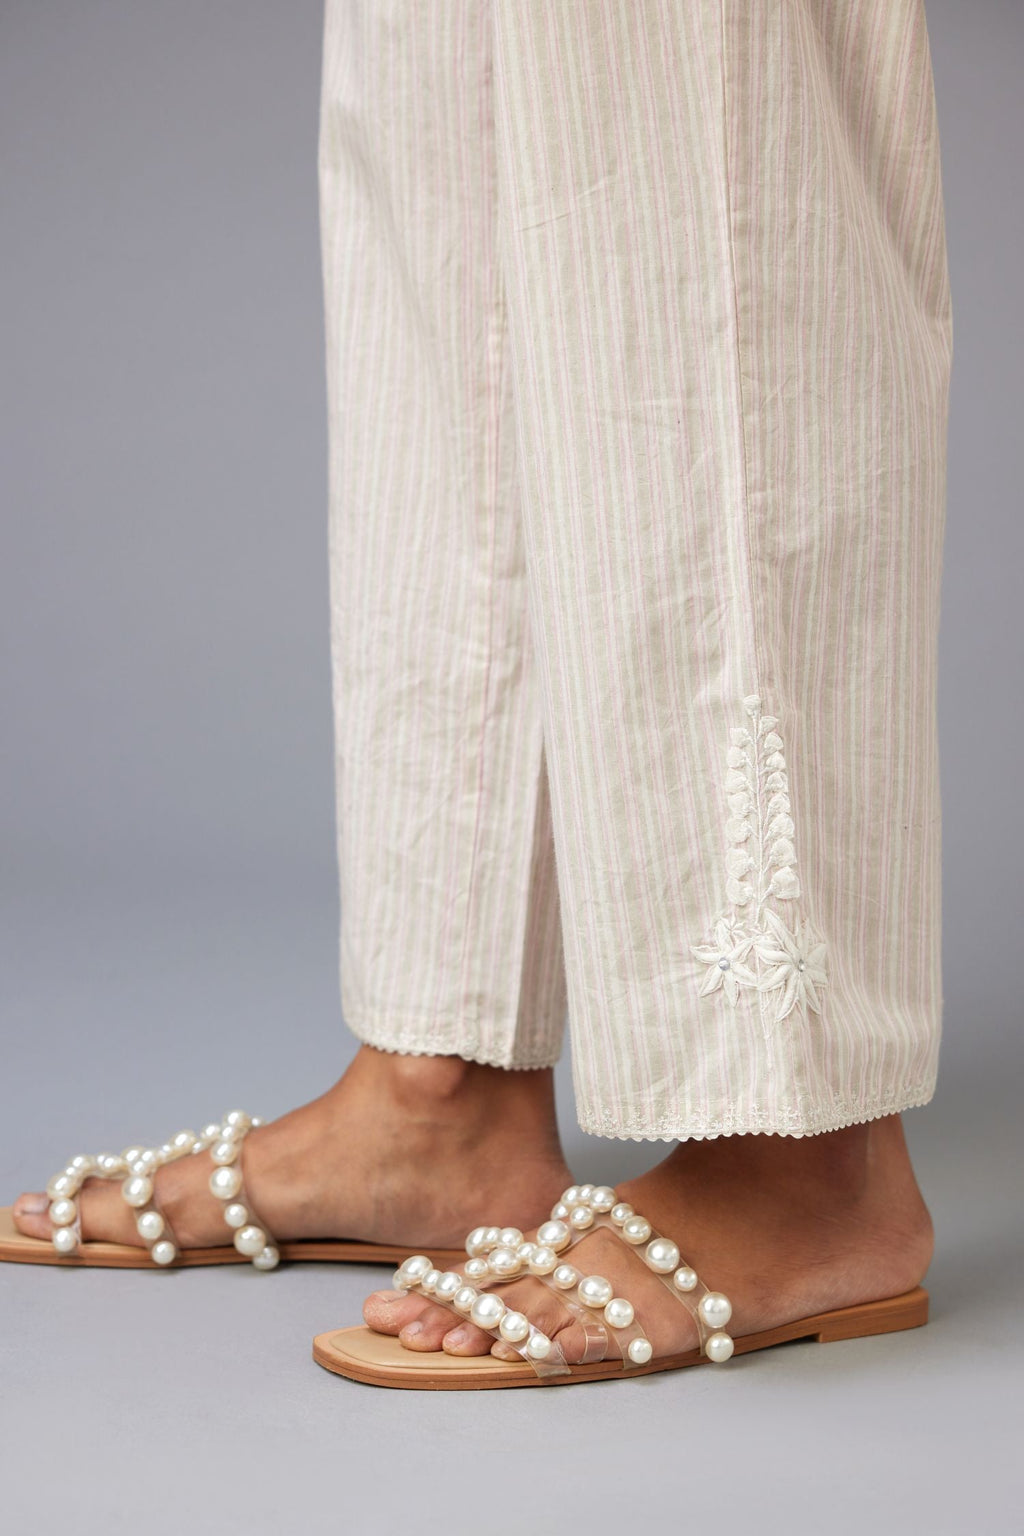 Pink and grey printed stripe Cotton straight pants with a chiffon embroidered boota at the hem.